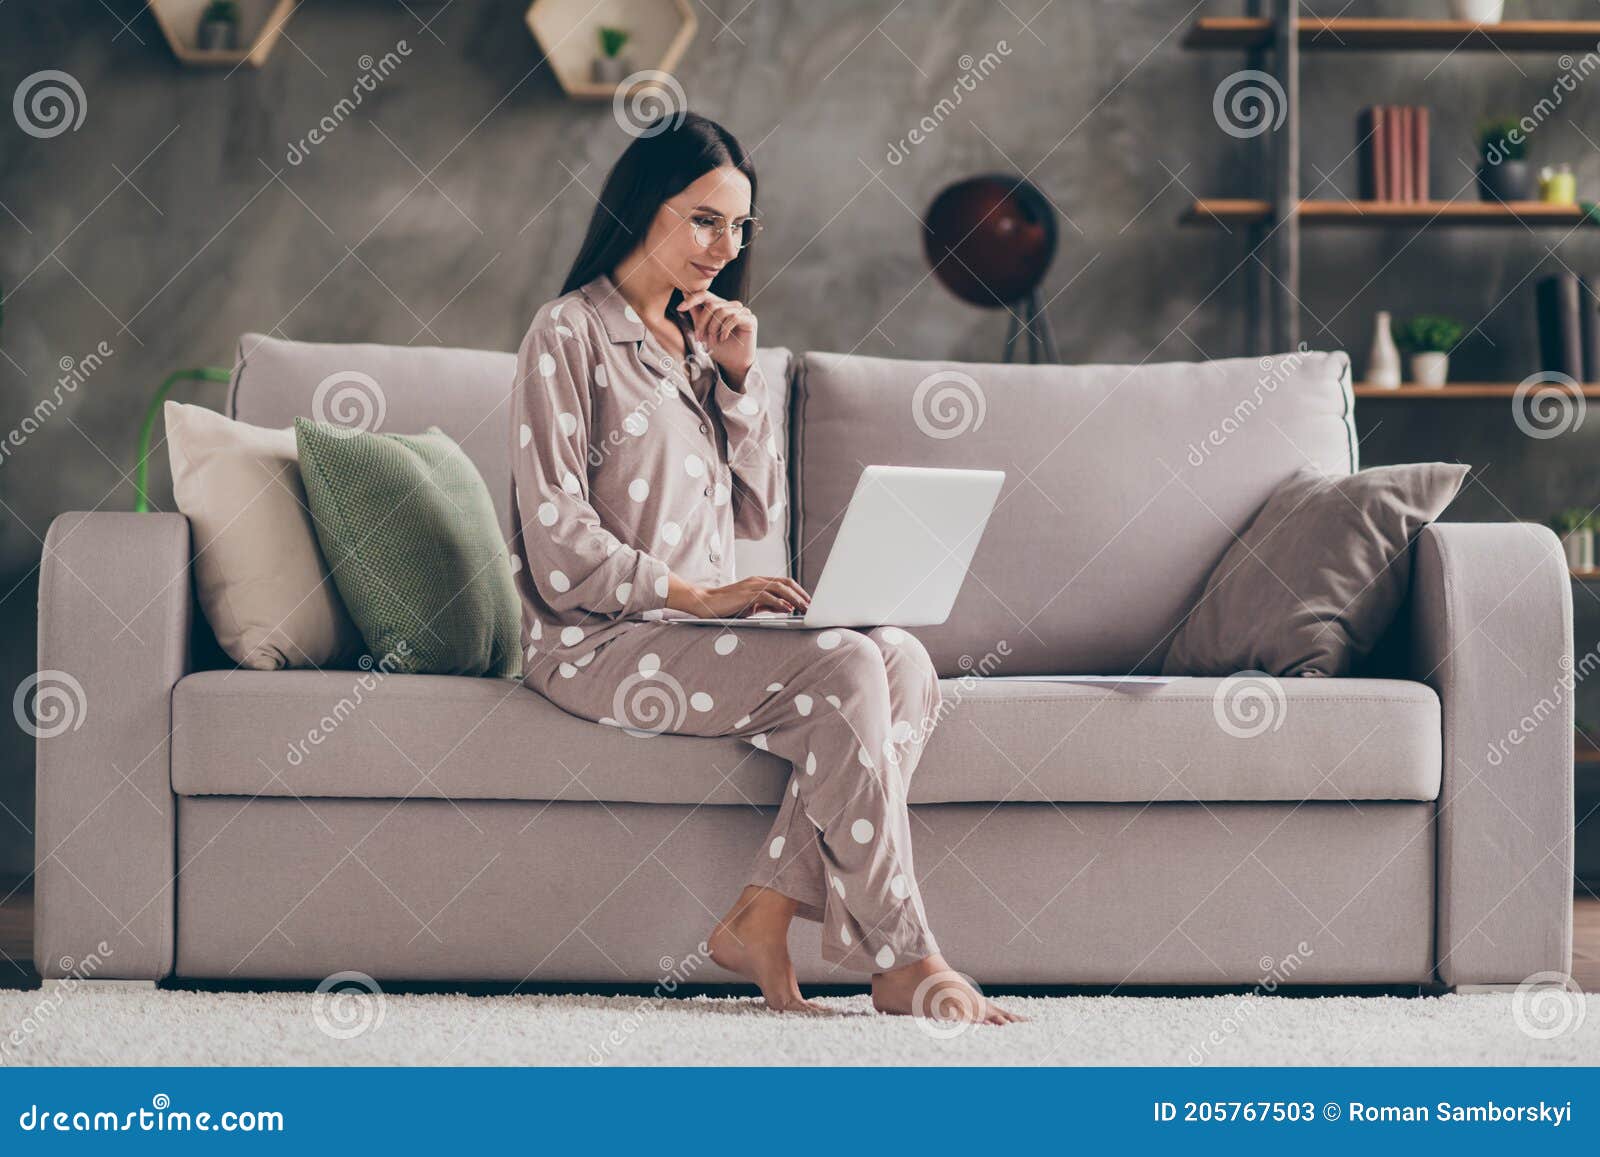 profile photo of nice optimistic girl fist face sit write laptop wear spectacles pijama at home on sofa